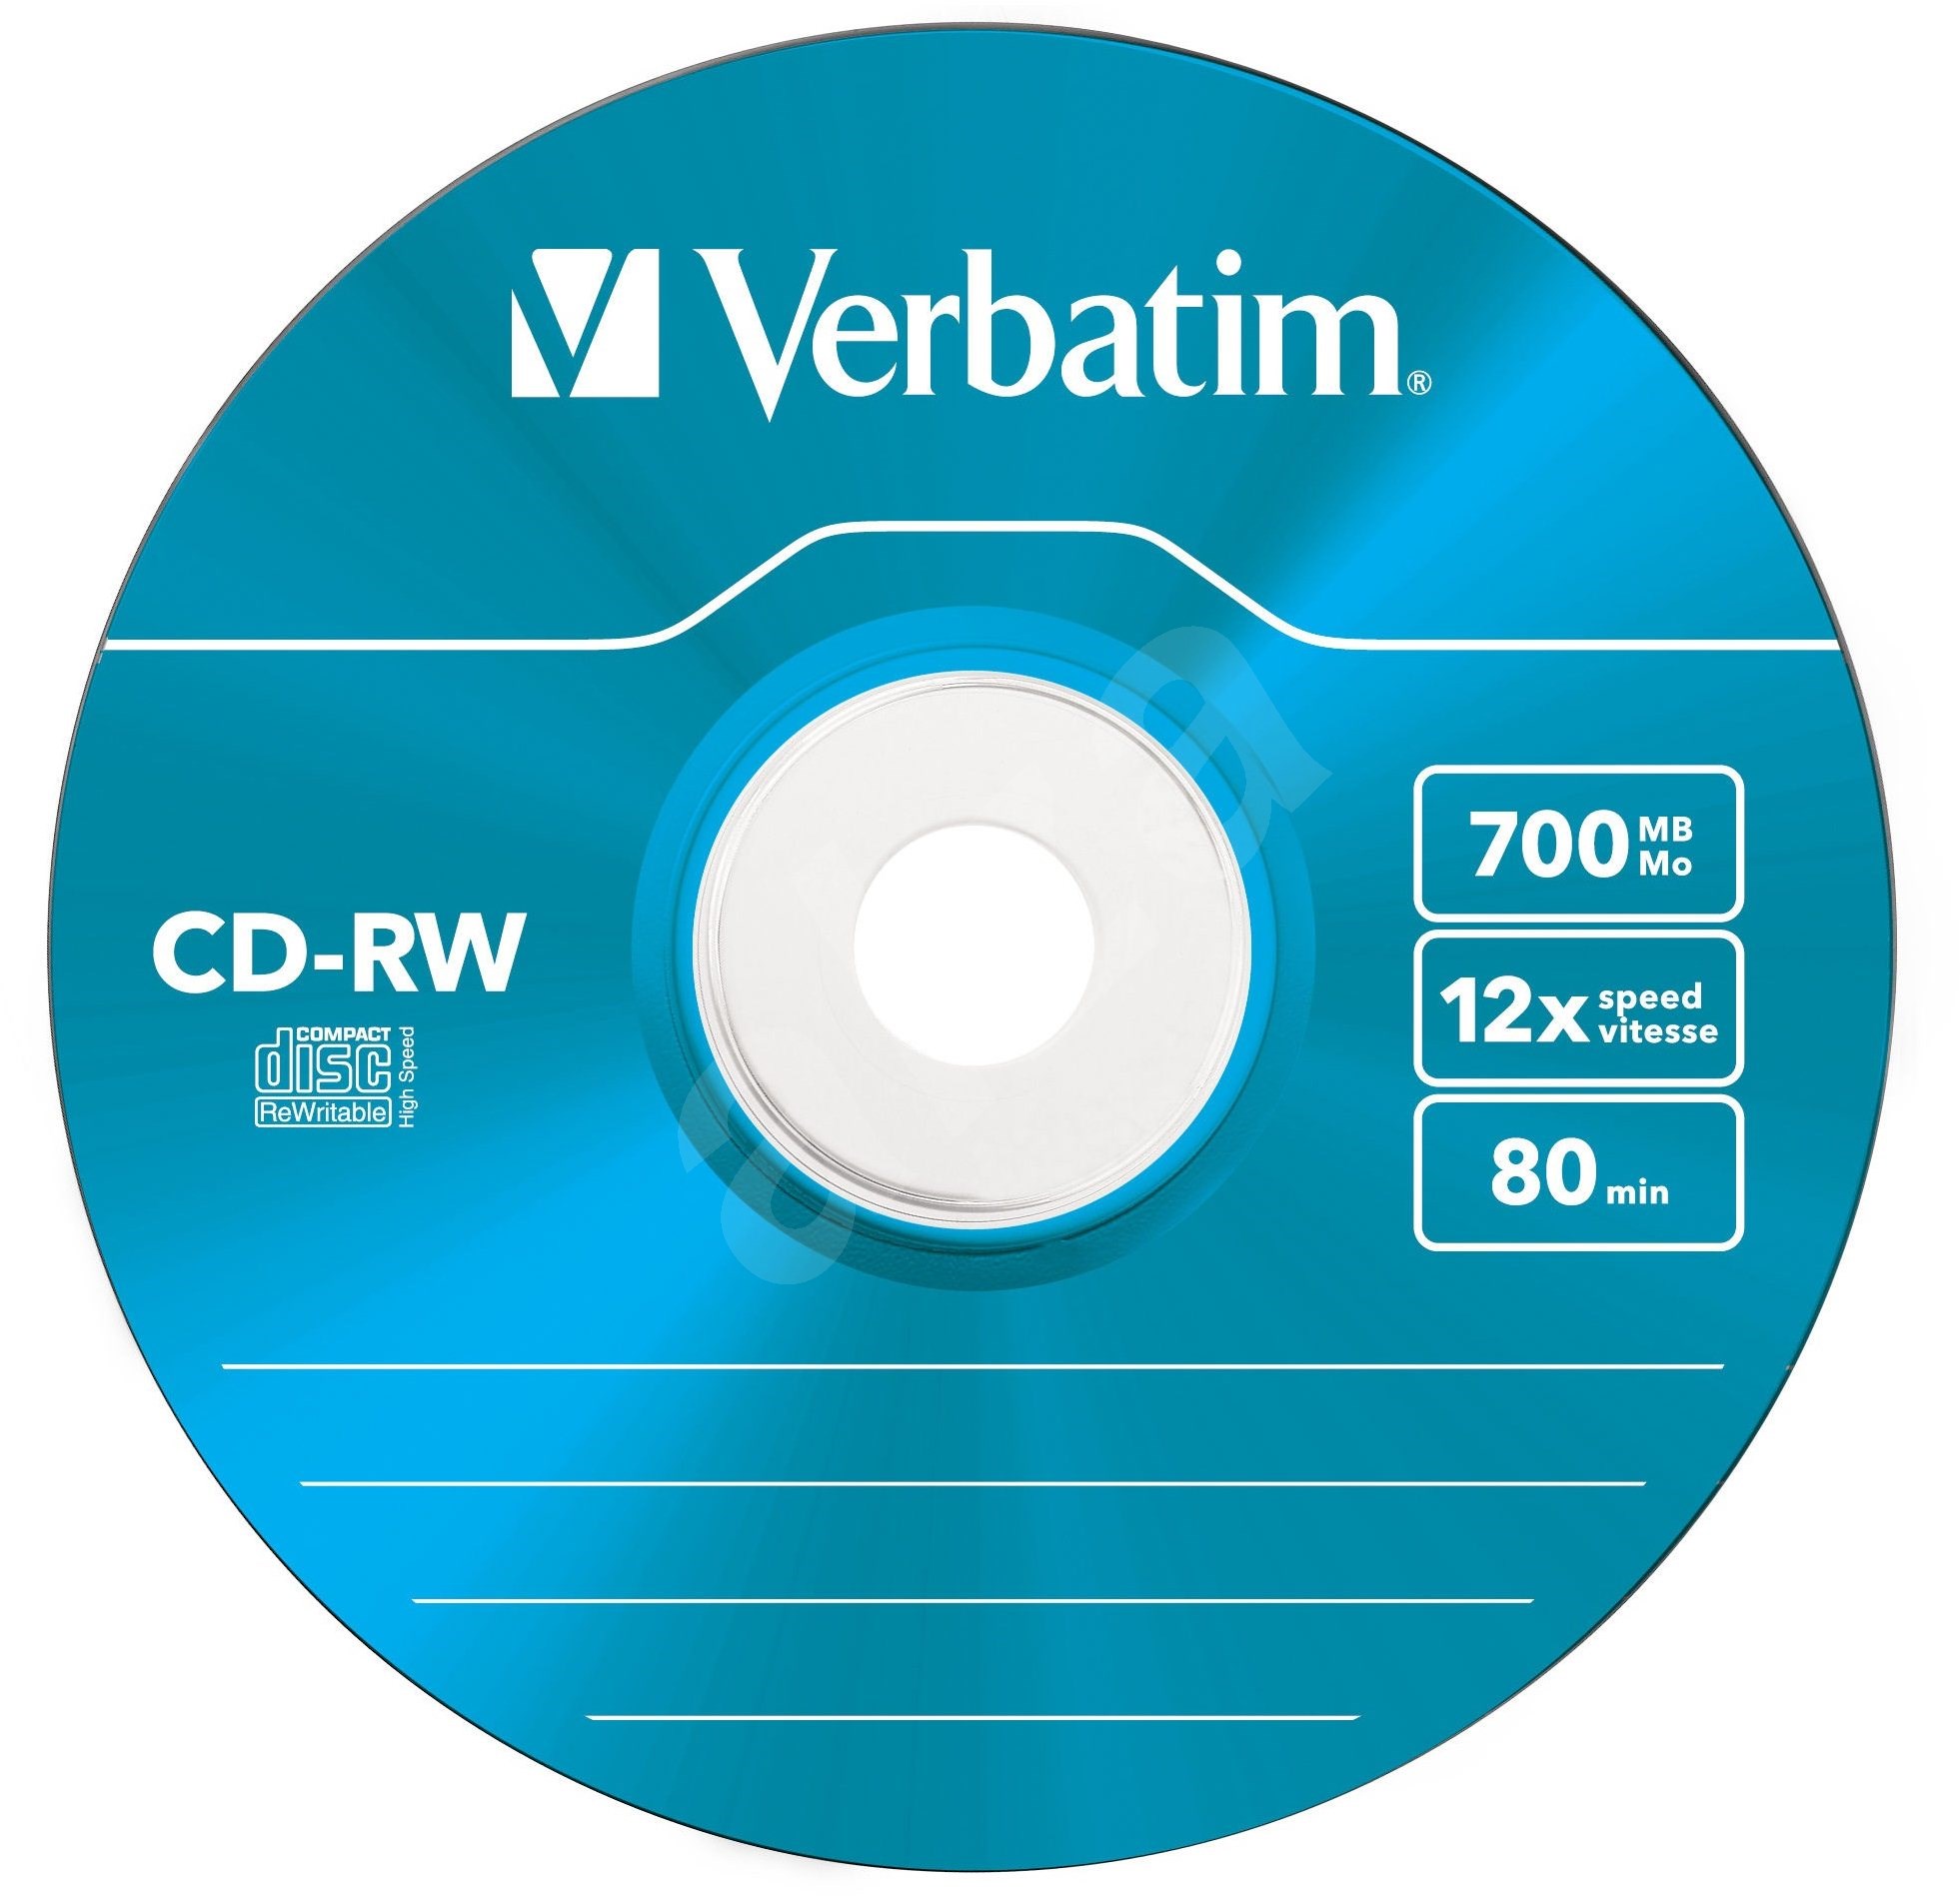 How to Erase and Reuse a CD-RW or DVD-RW Disk